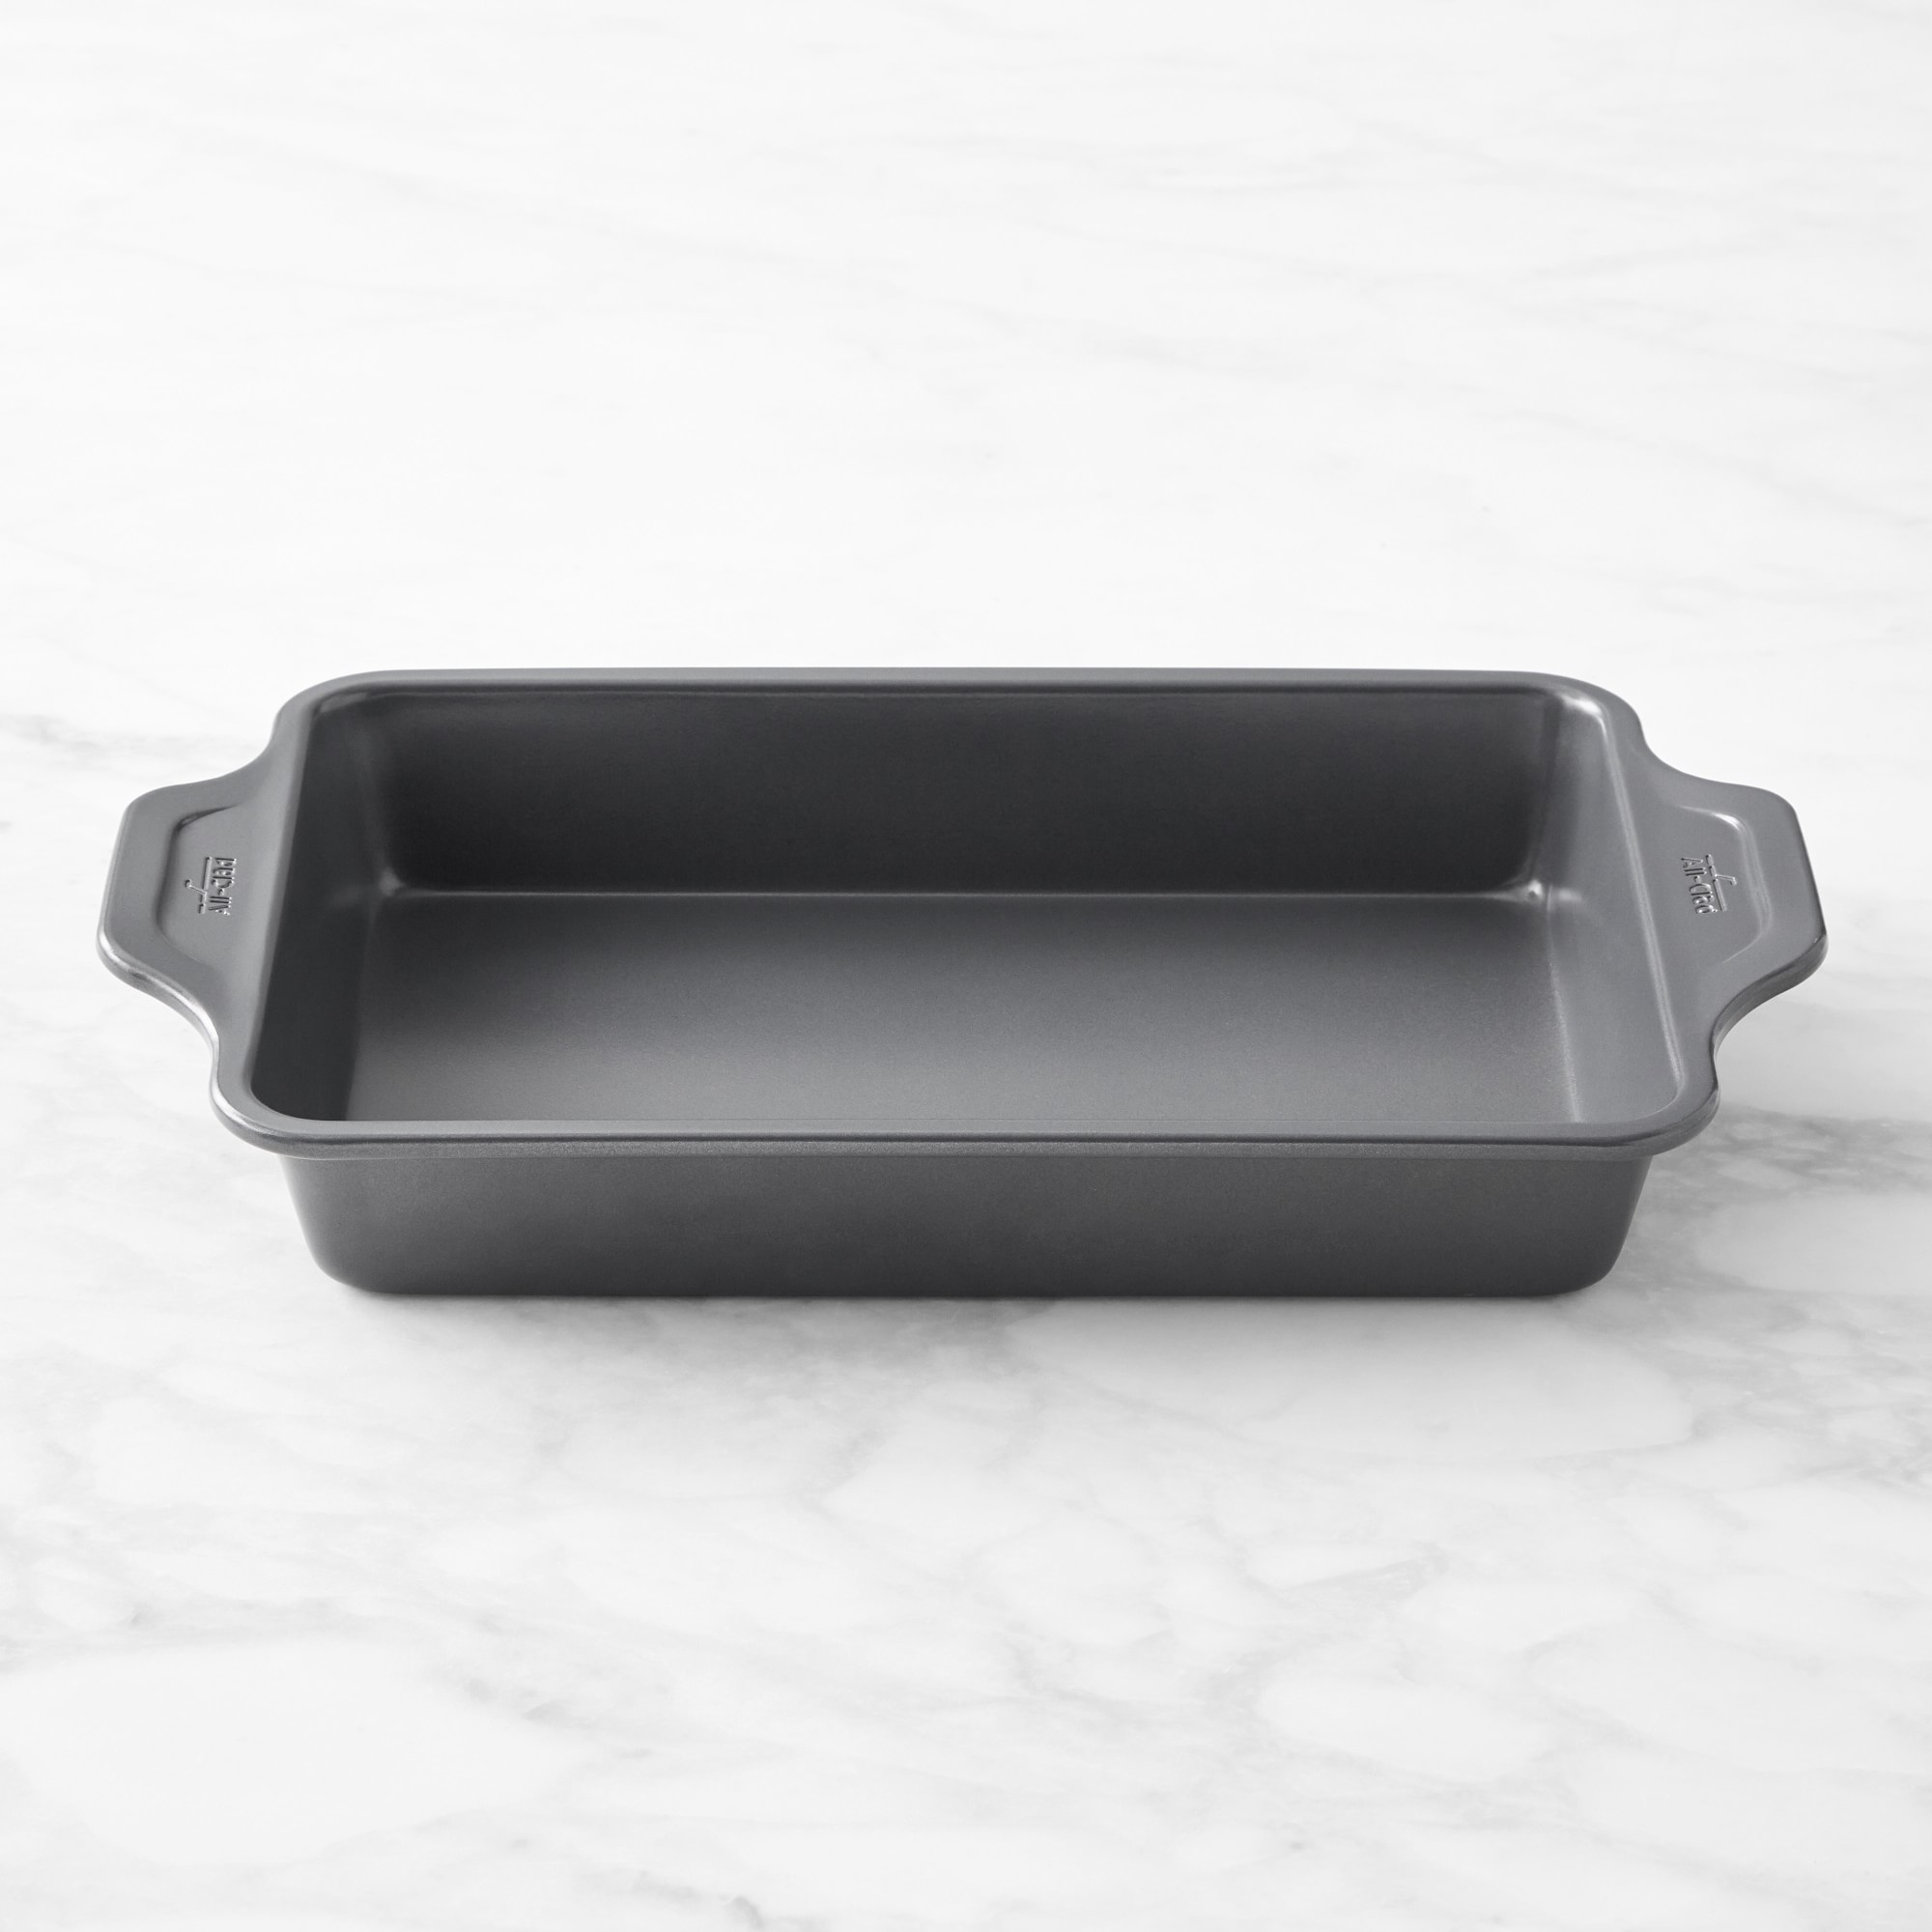 All-Clad Nonstick Pro-Release Rectangle Baking Pan, 13" x 9"